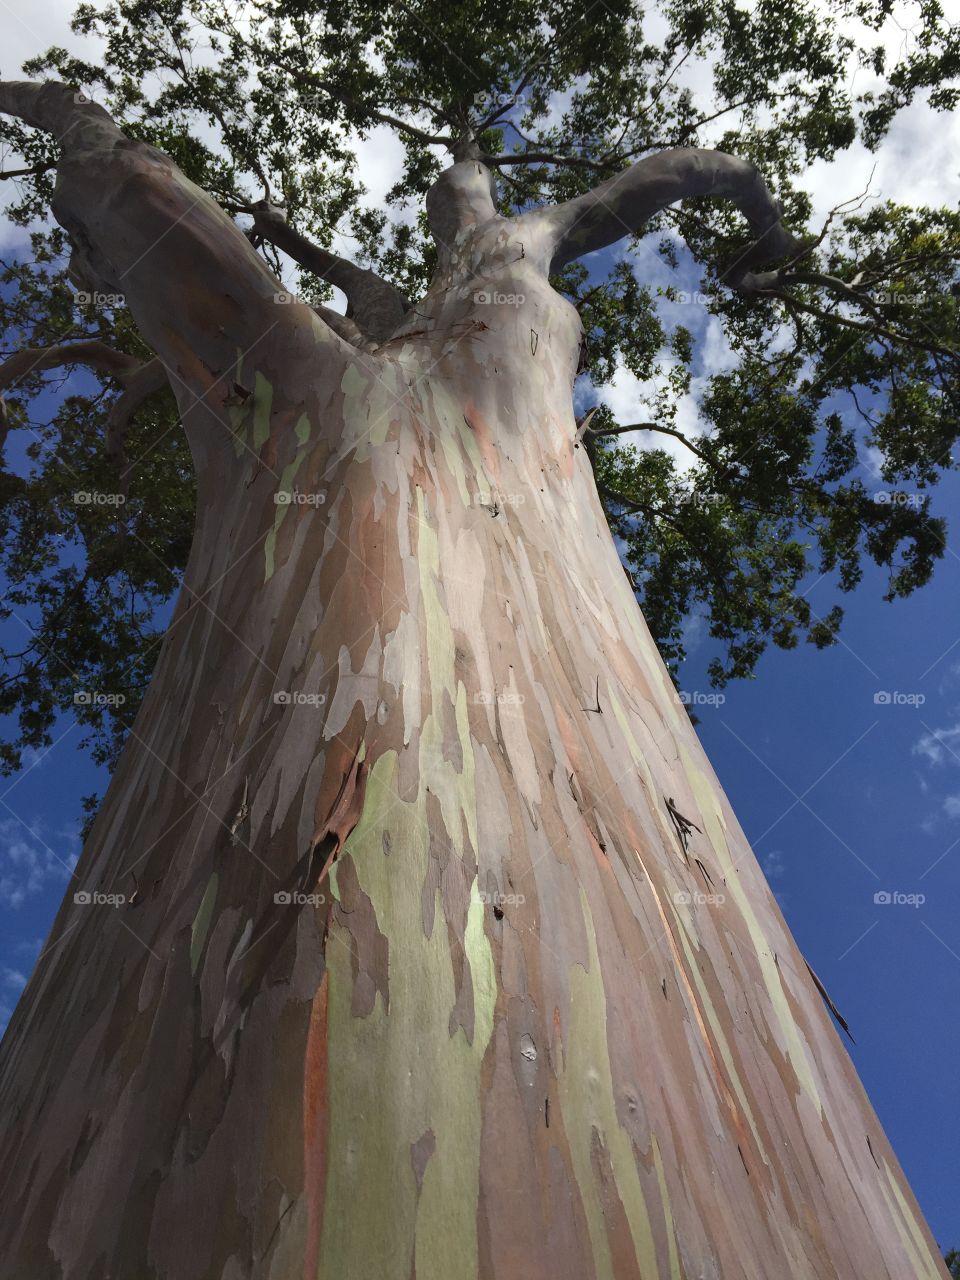 Looking up the massive trunk of a rainbow sycamore against a sunlit blue sky in Oahu, Hawaii